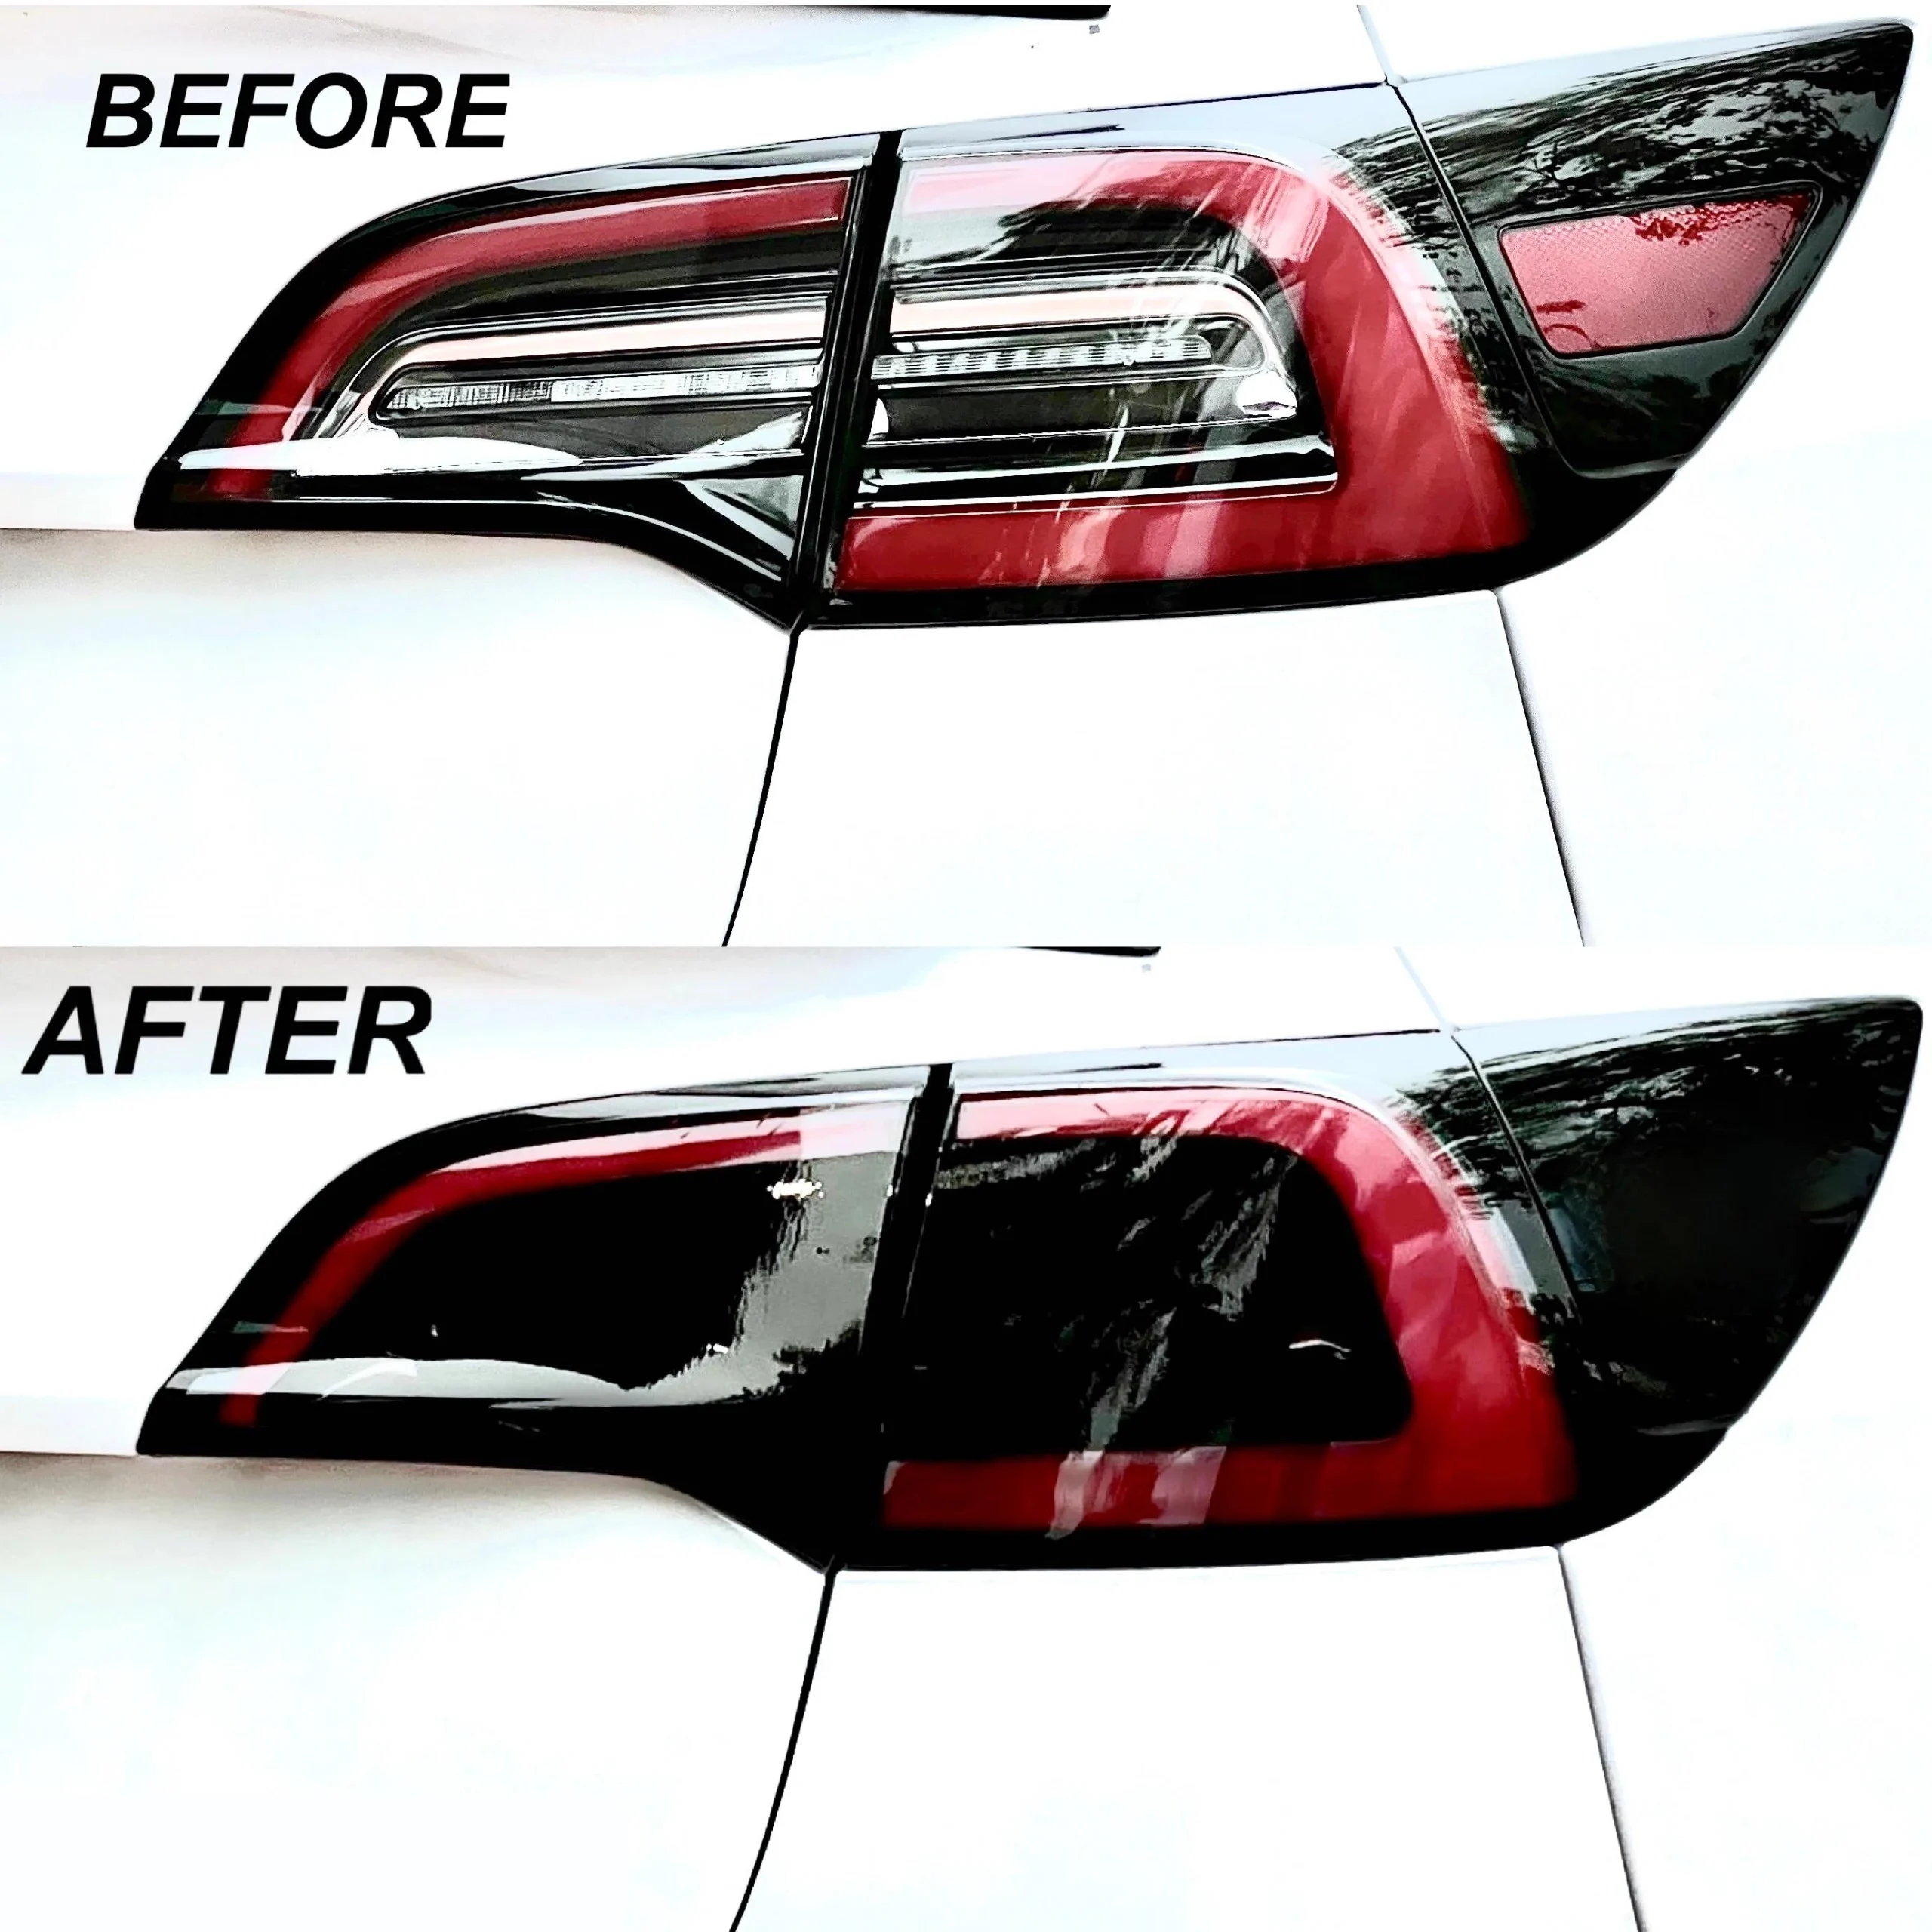 smoked rear lights - Can you tint your rear lights